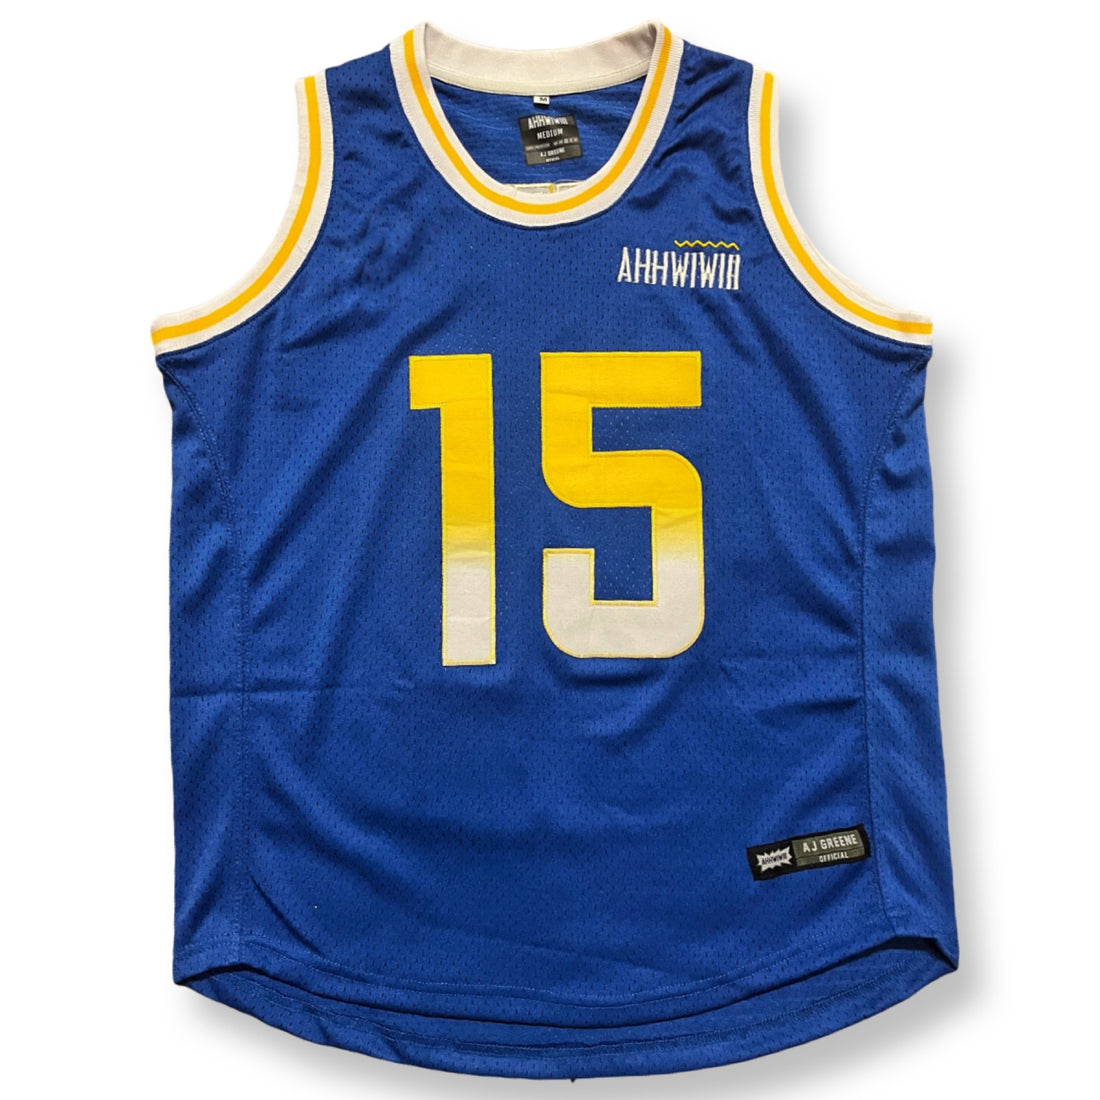 "LOS ANGELES" AHHWIWIII JERSEY